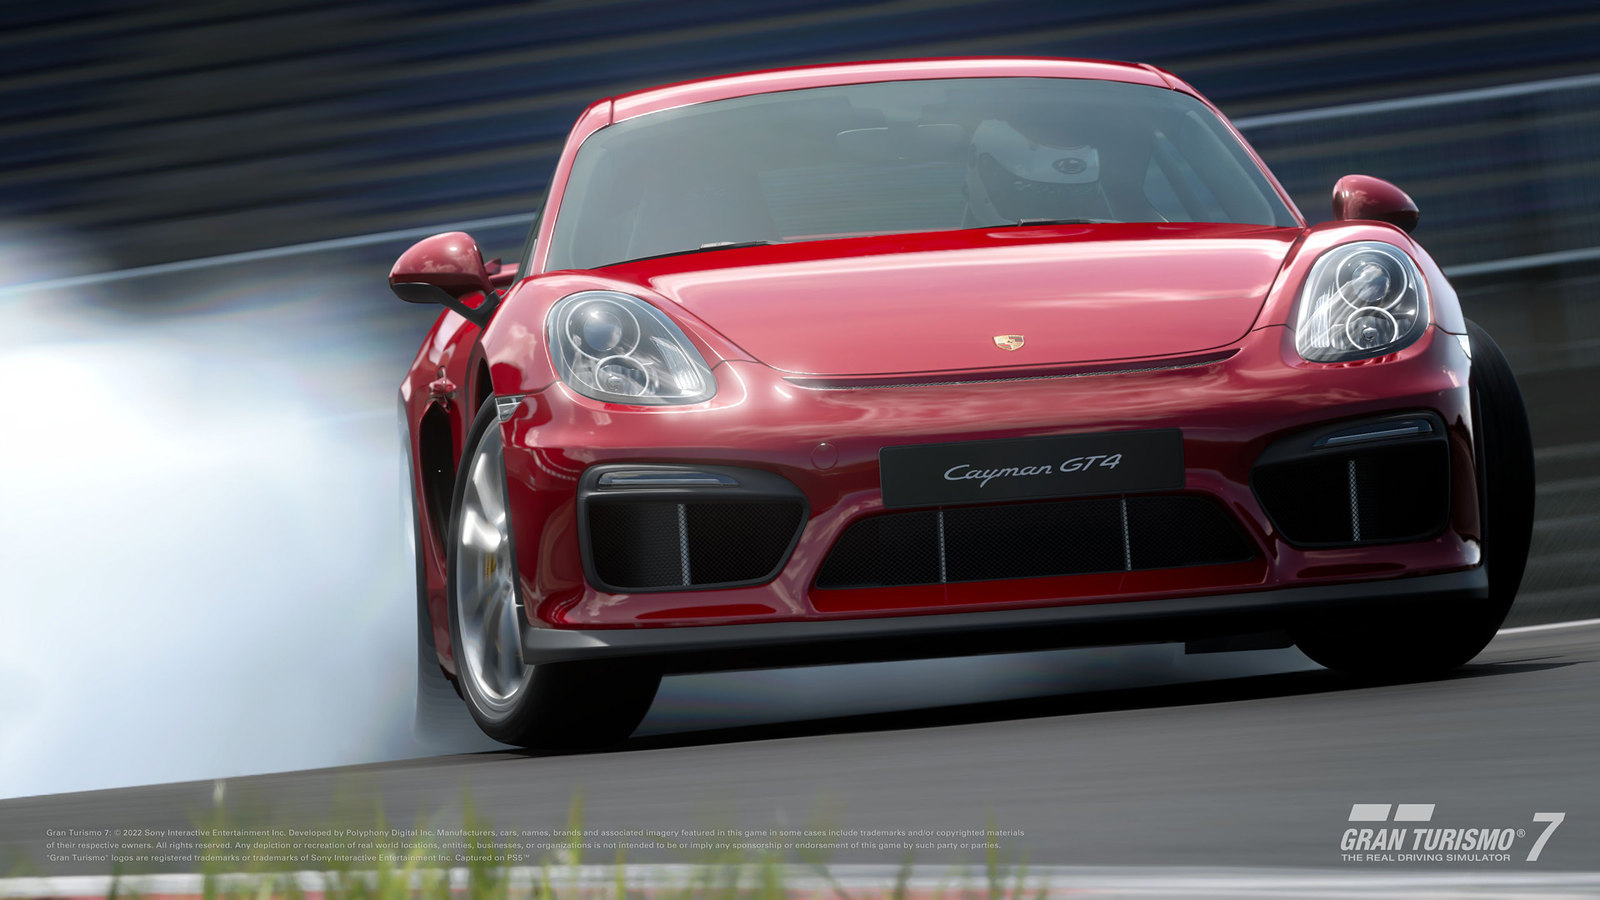 The Gran Turismo 7 August Update: Four New Cars, Including One You